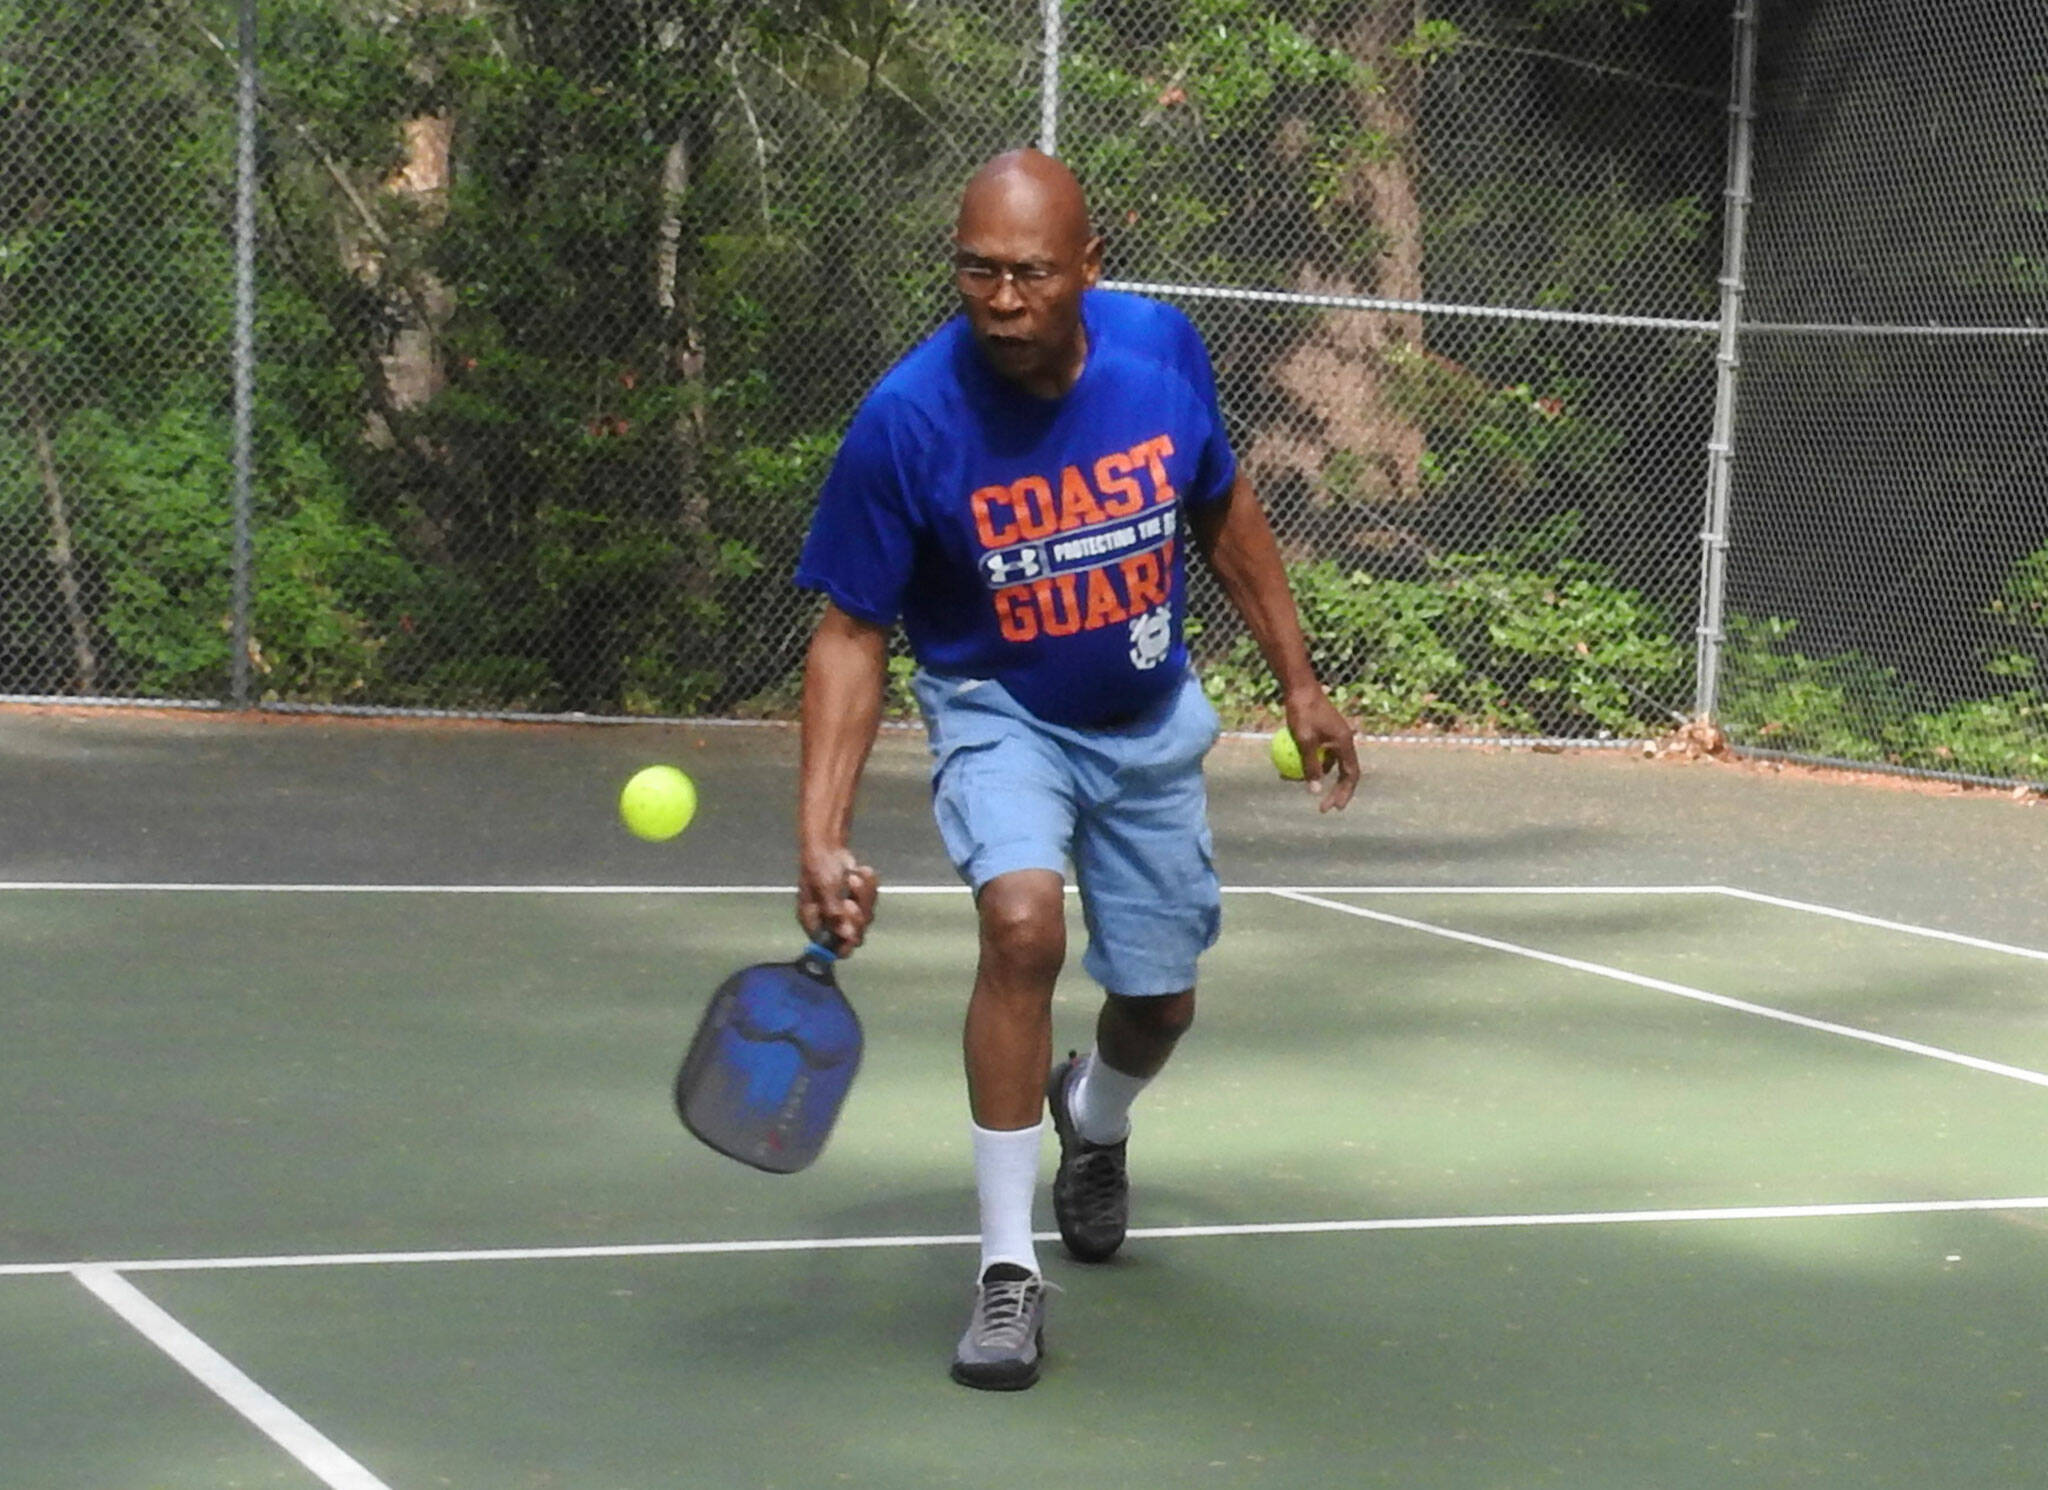 Sen. John Lovick, D-Mill Creek, has proposed a bill to make pickleball the official state sport. (Photo provided by Chuck Wright)